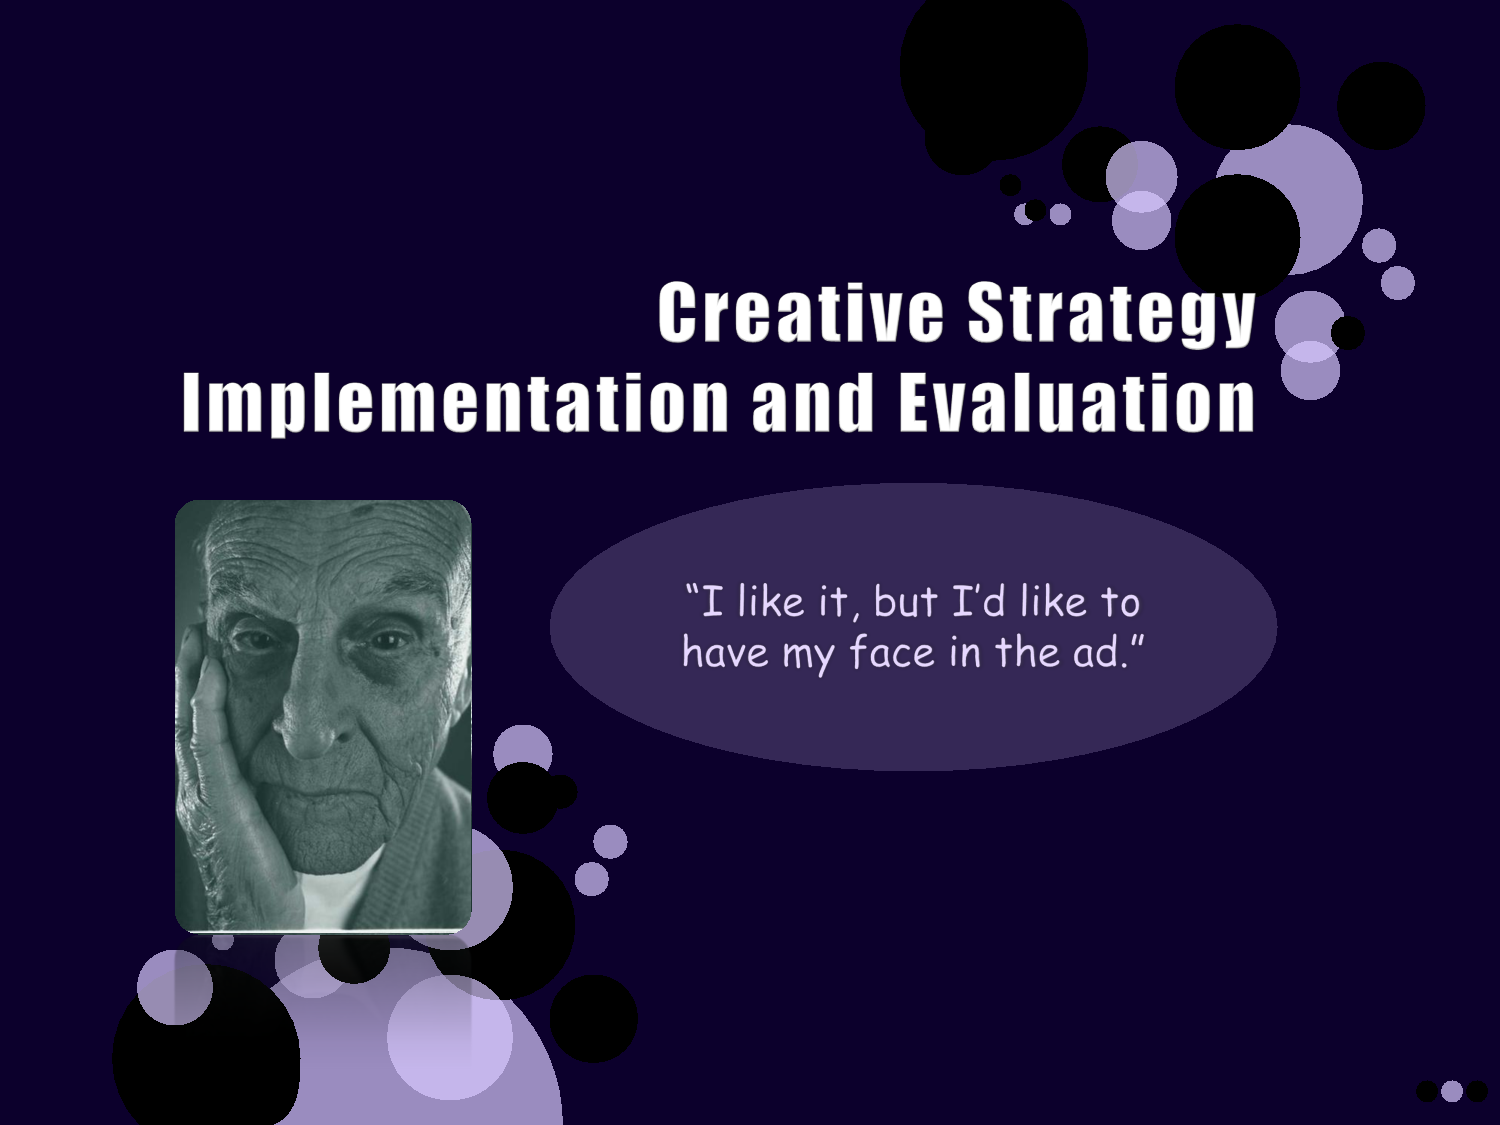 Lecture on Creative Strategy Implementation and Evaluation